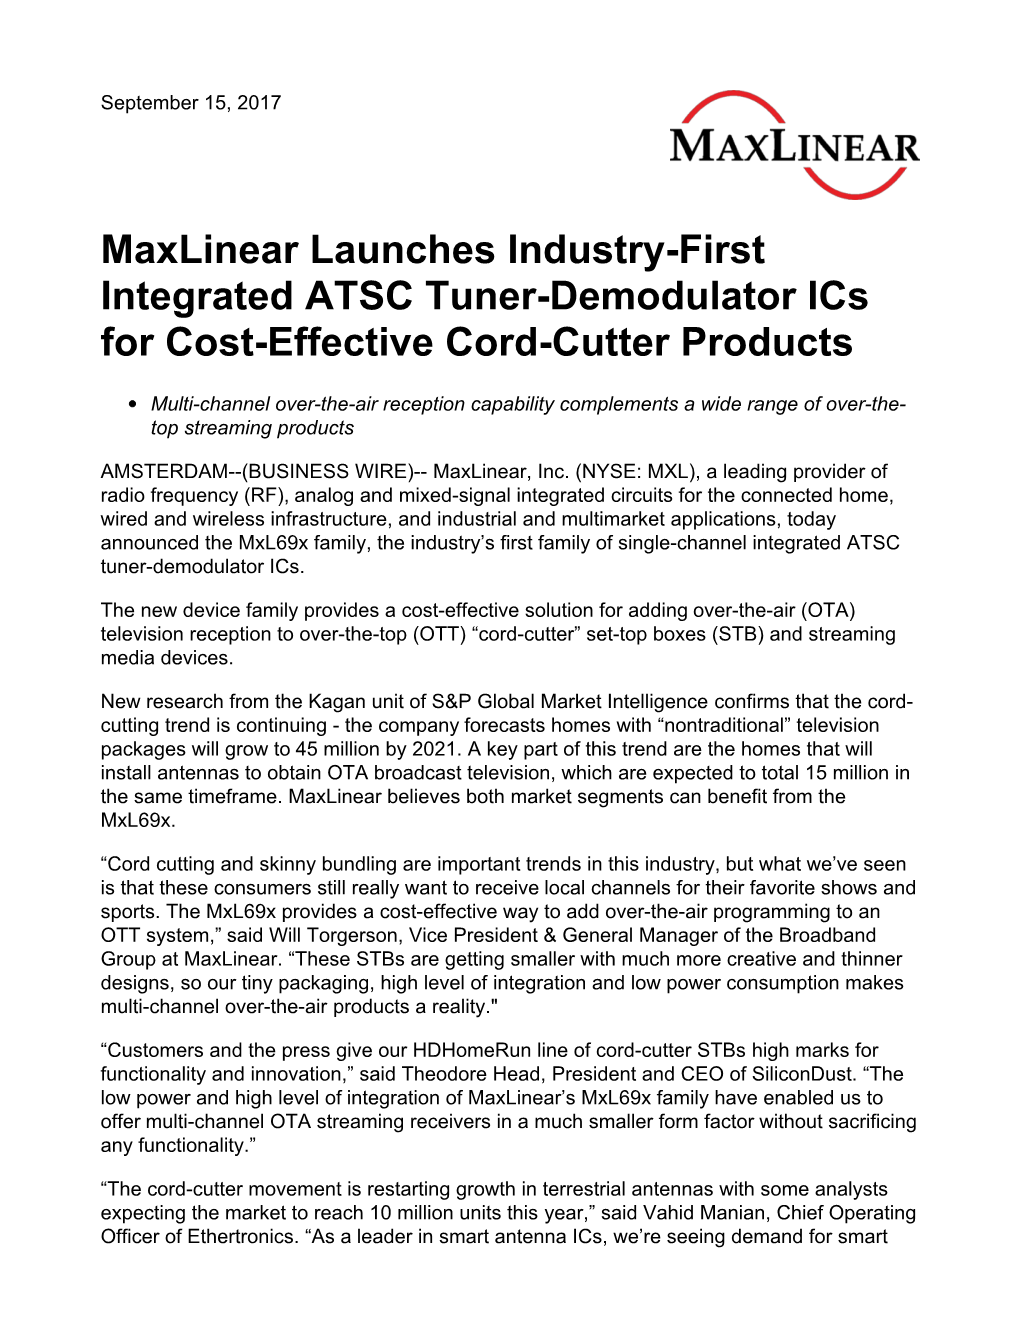 Maxlinear Launches Industry-First Integrated ATSC Tuner-Demodulator Ics for Cost-Effective Cord-Cutter Products